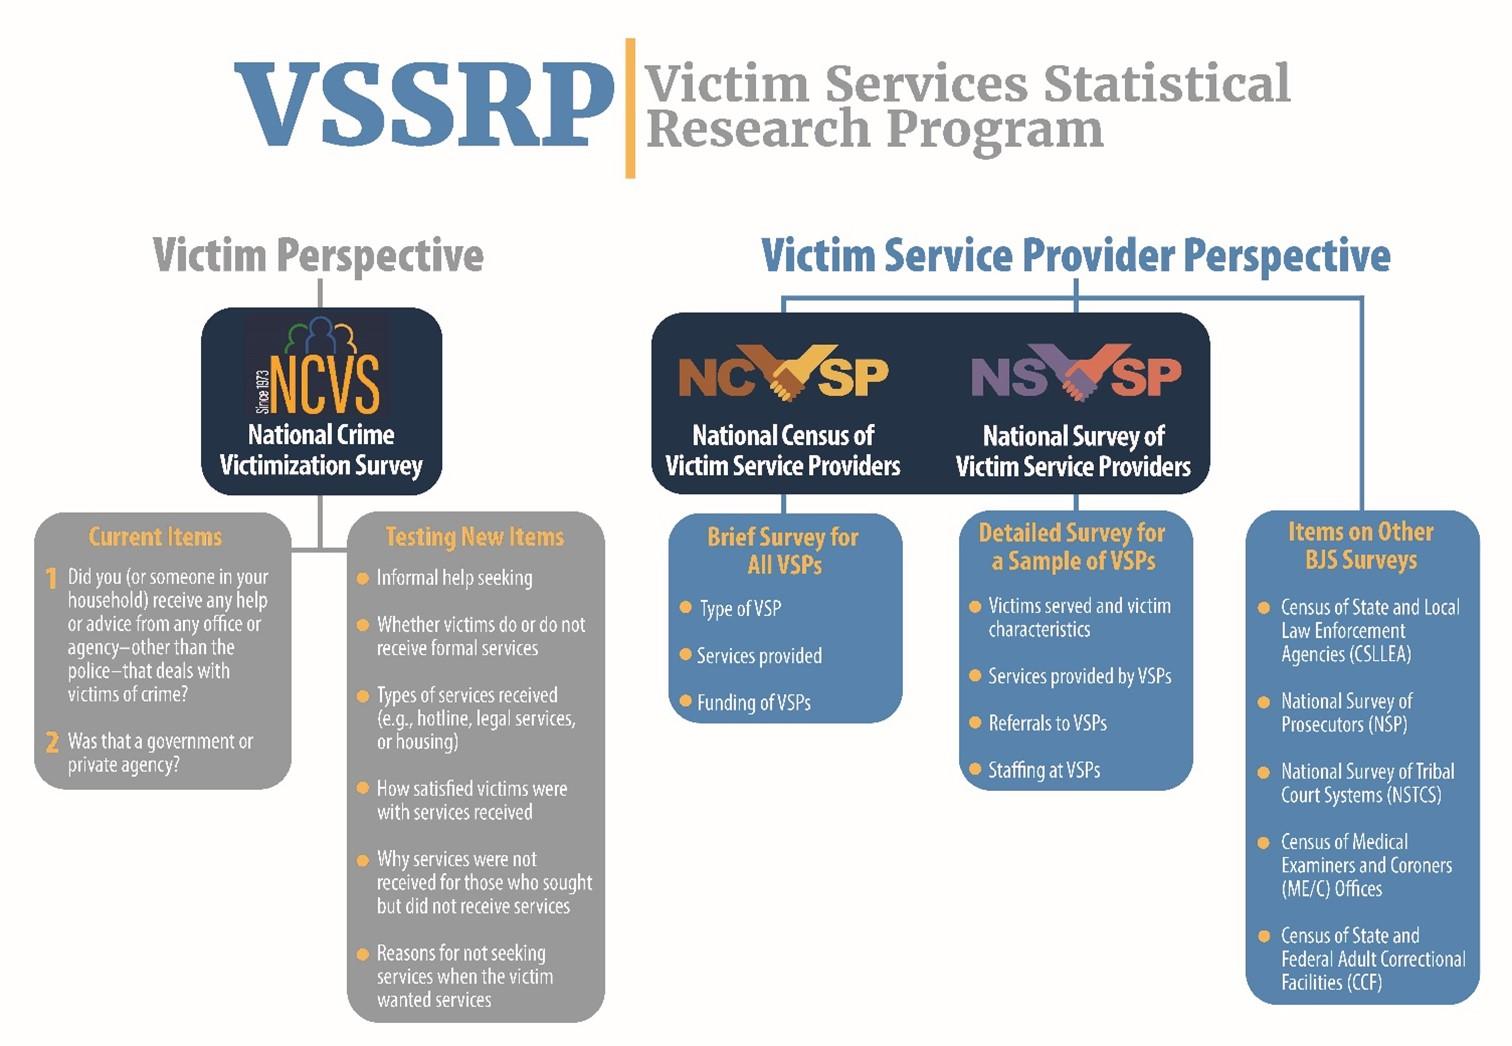 Victim Services Statistical Research Program Image